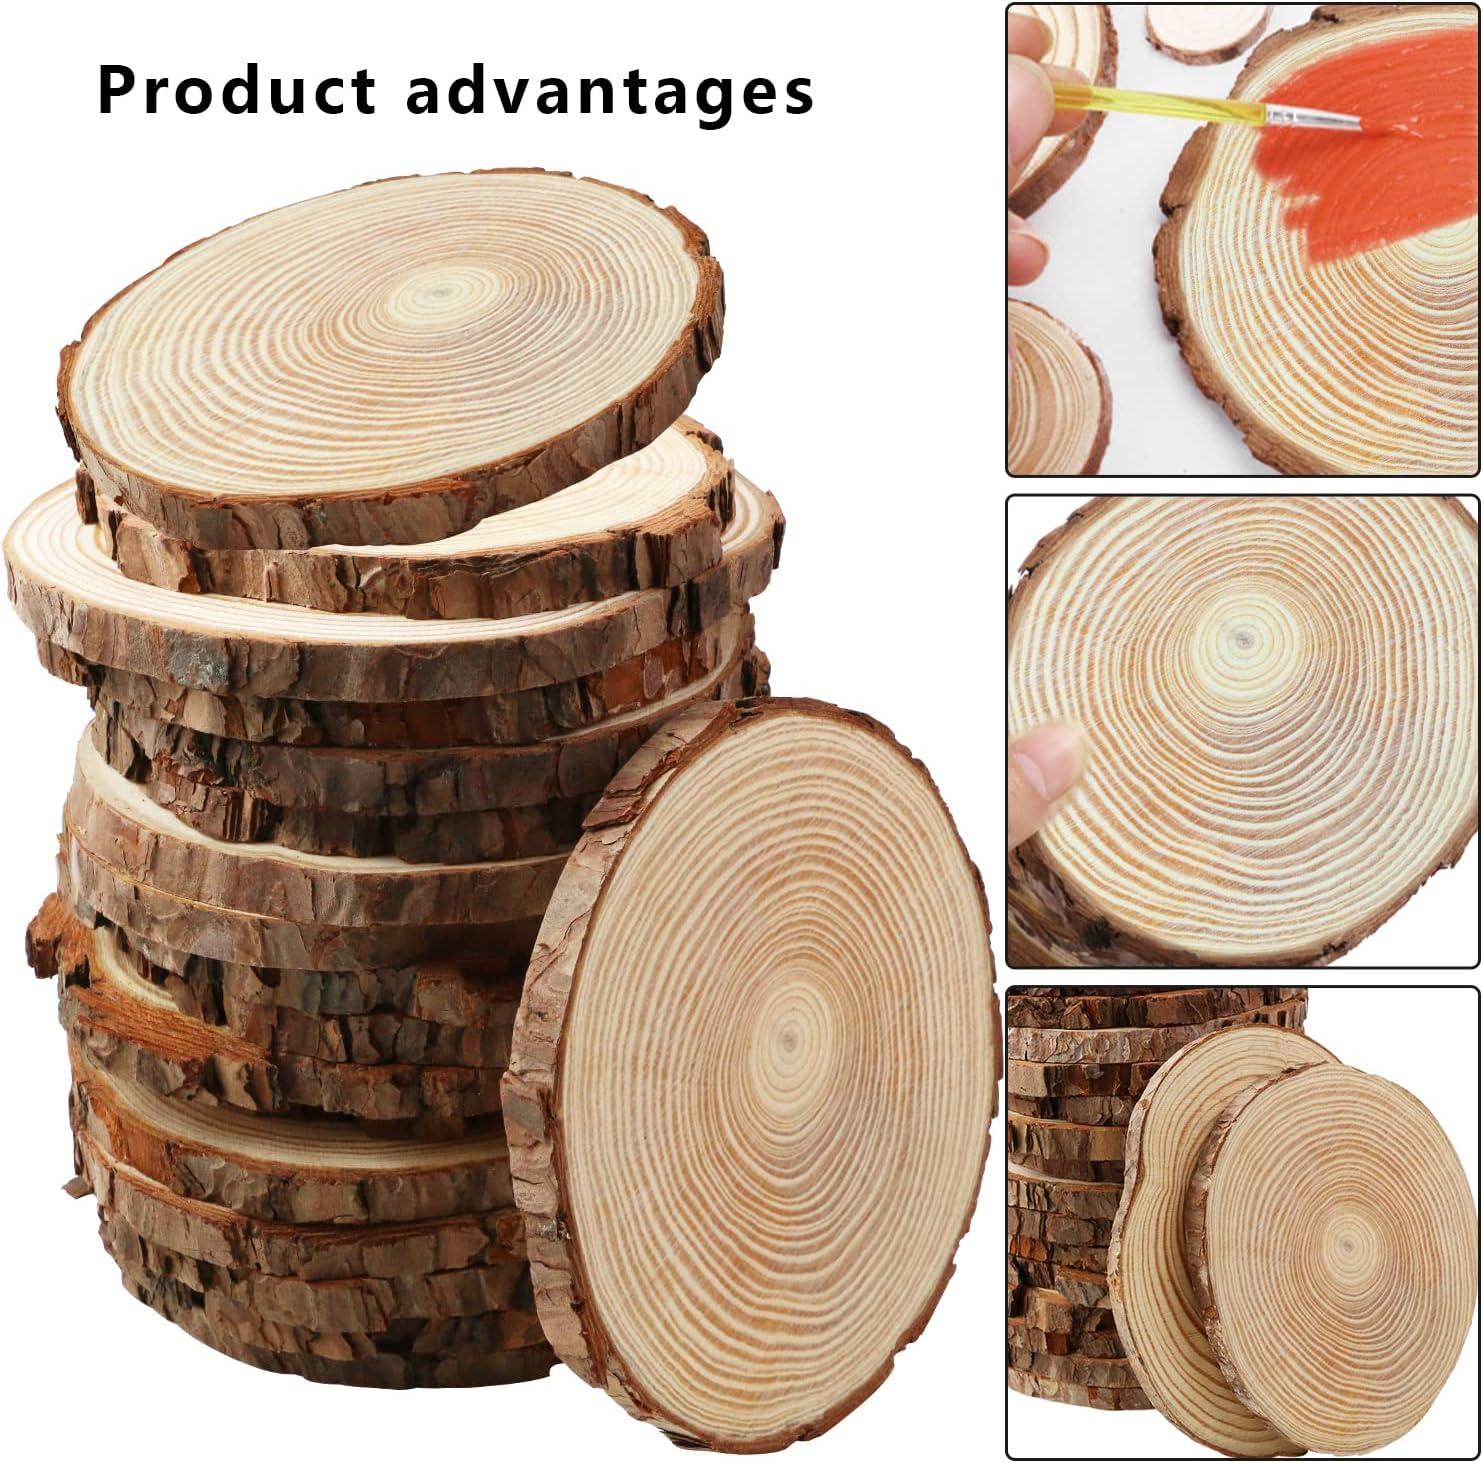 Tree Slices: 25 Wood Discs & Wood rounds for sale